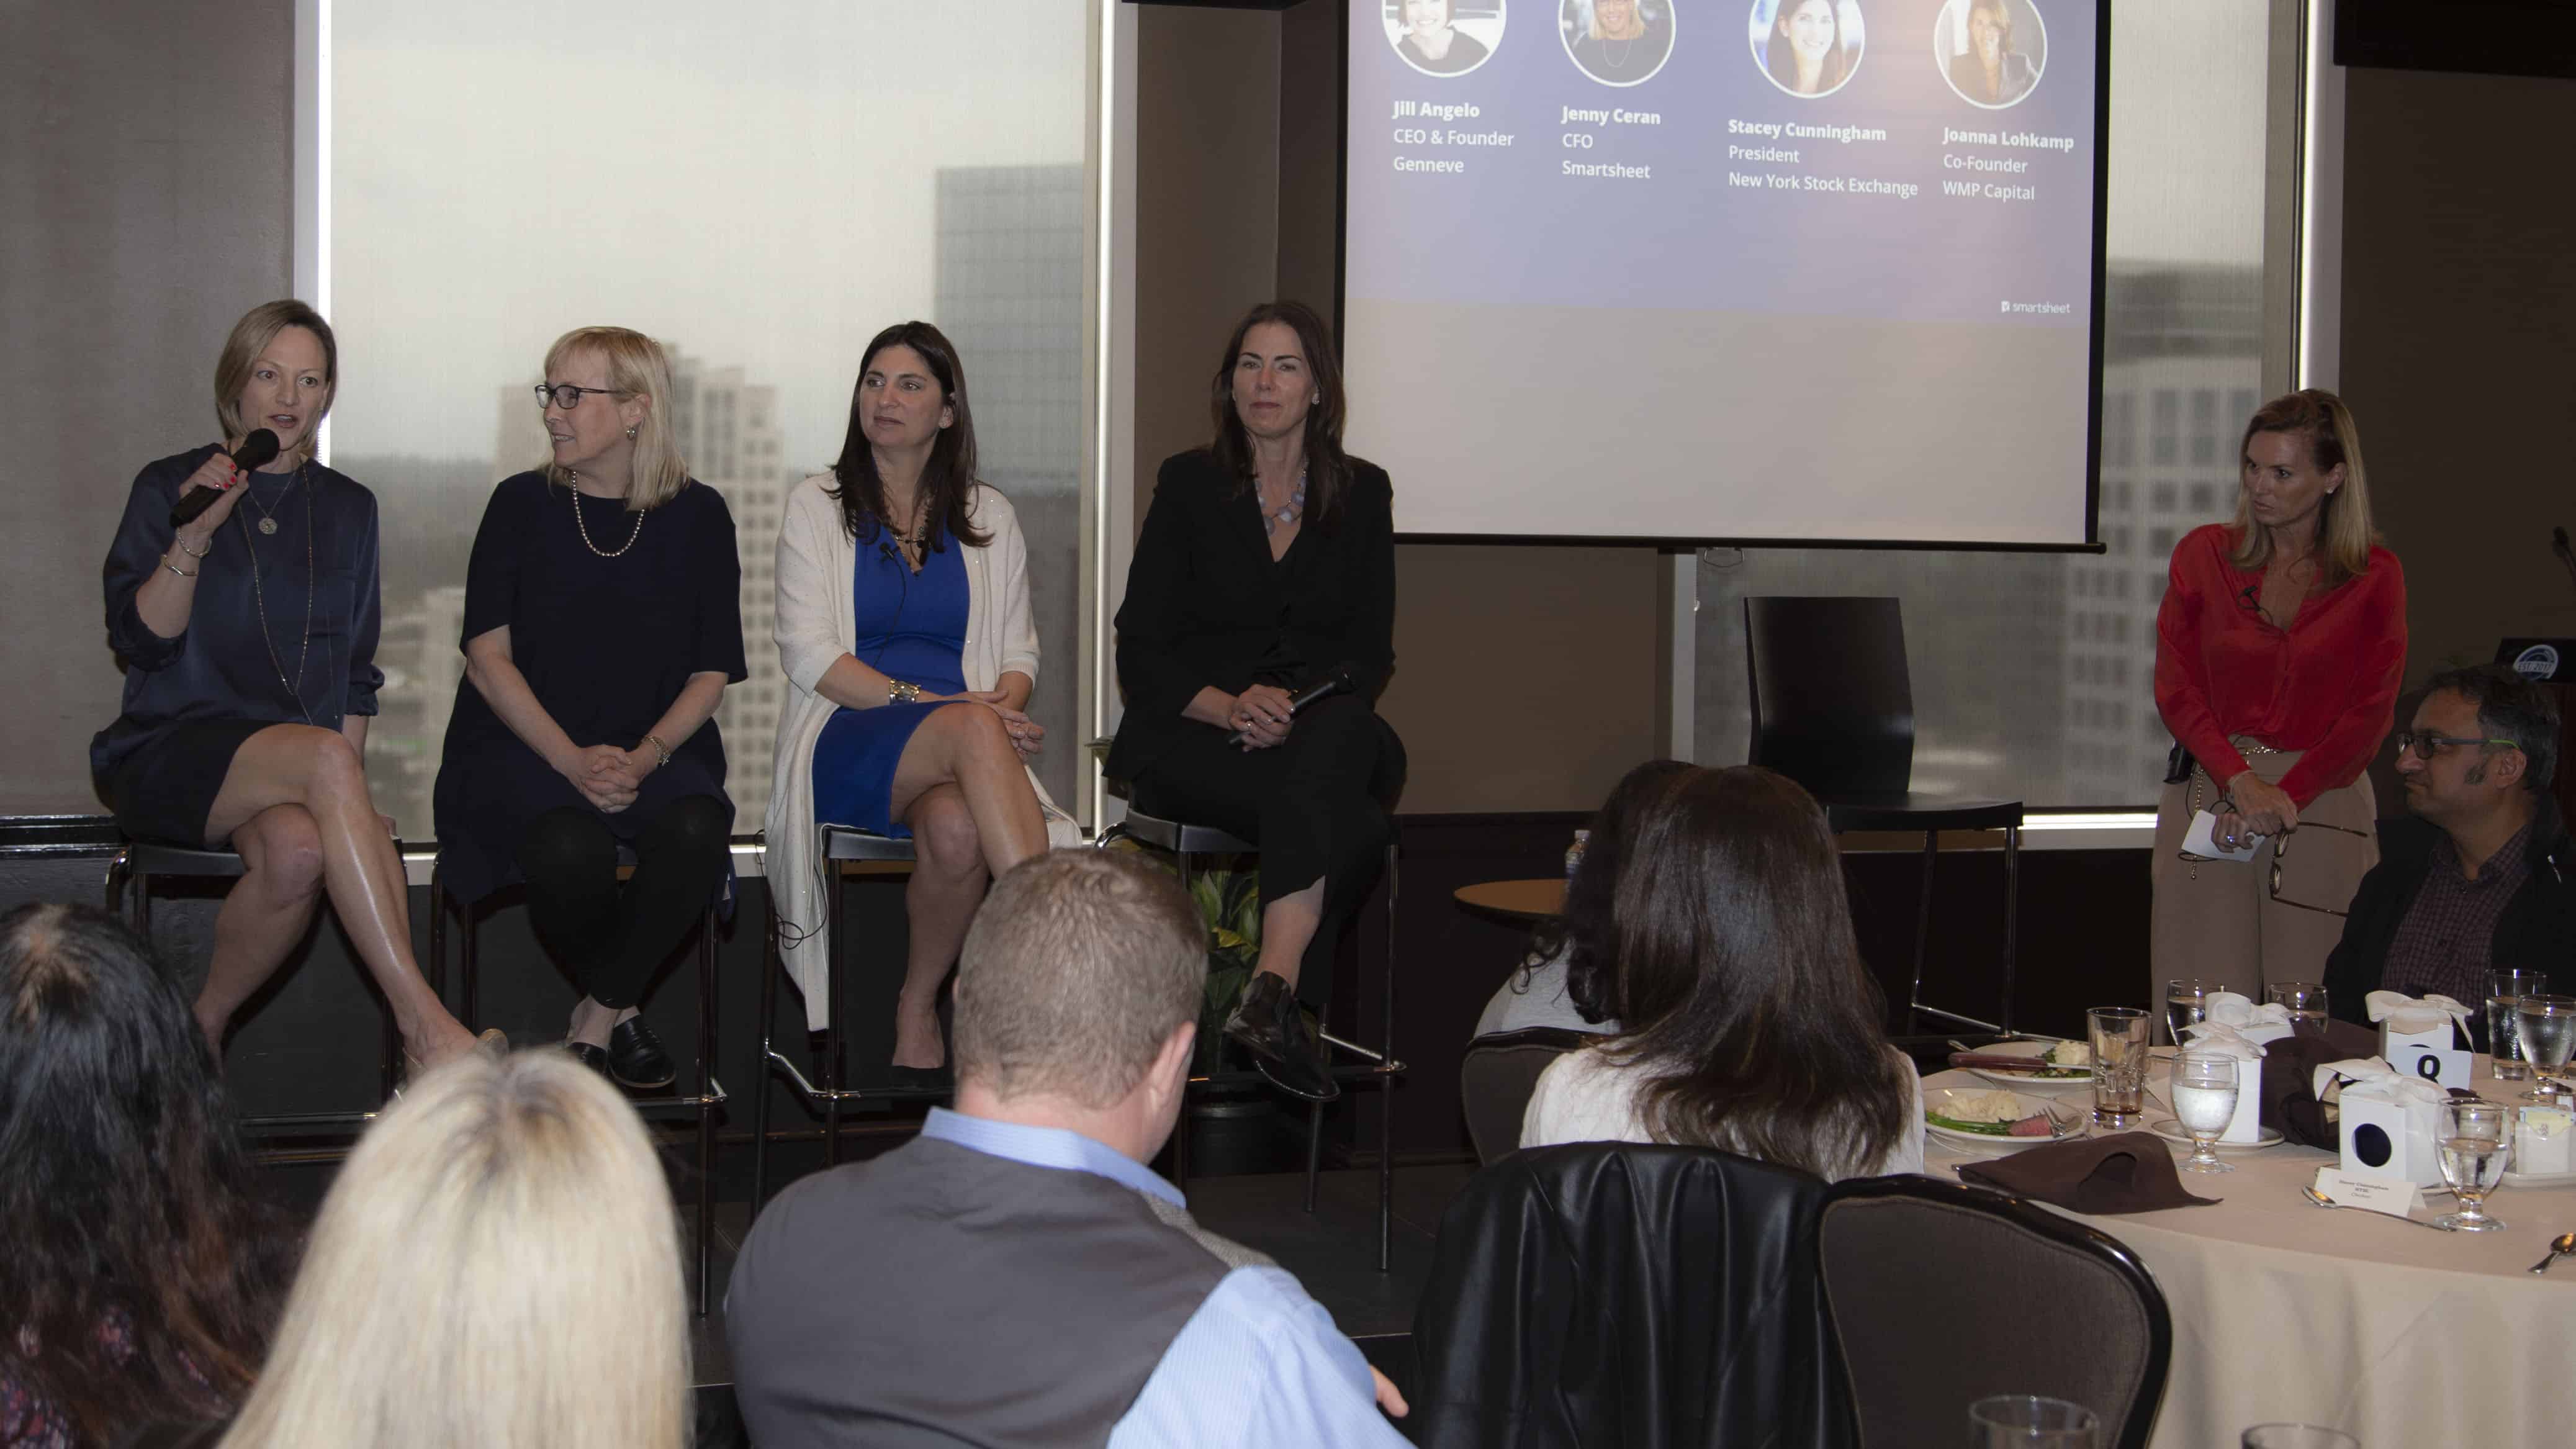 CEO Jill Angelo, CFO Jenny Ceran, President of the NYSE Stacey Cunningham, and Joanna Lohkamp on women in leadership panel discussion, hosted by Smartsheet